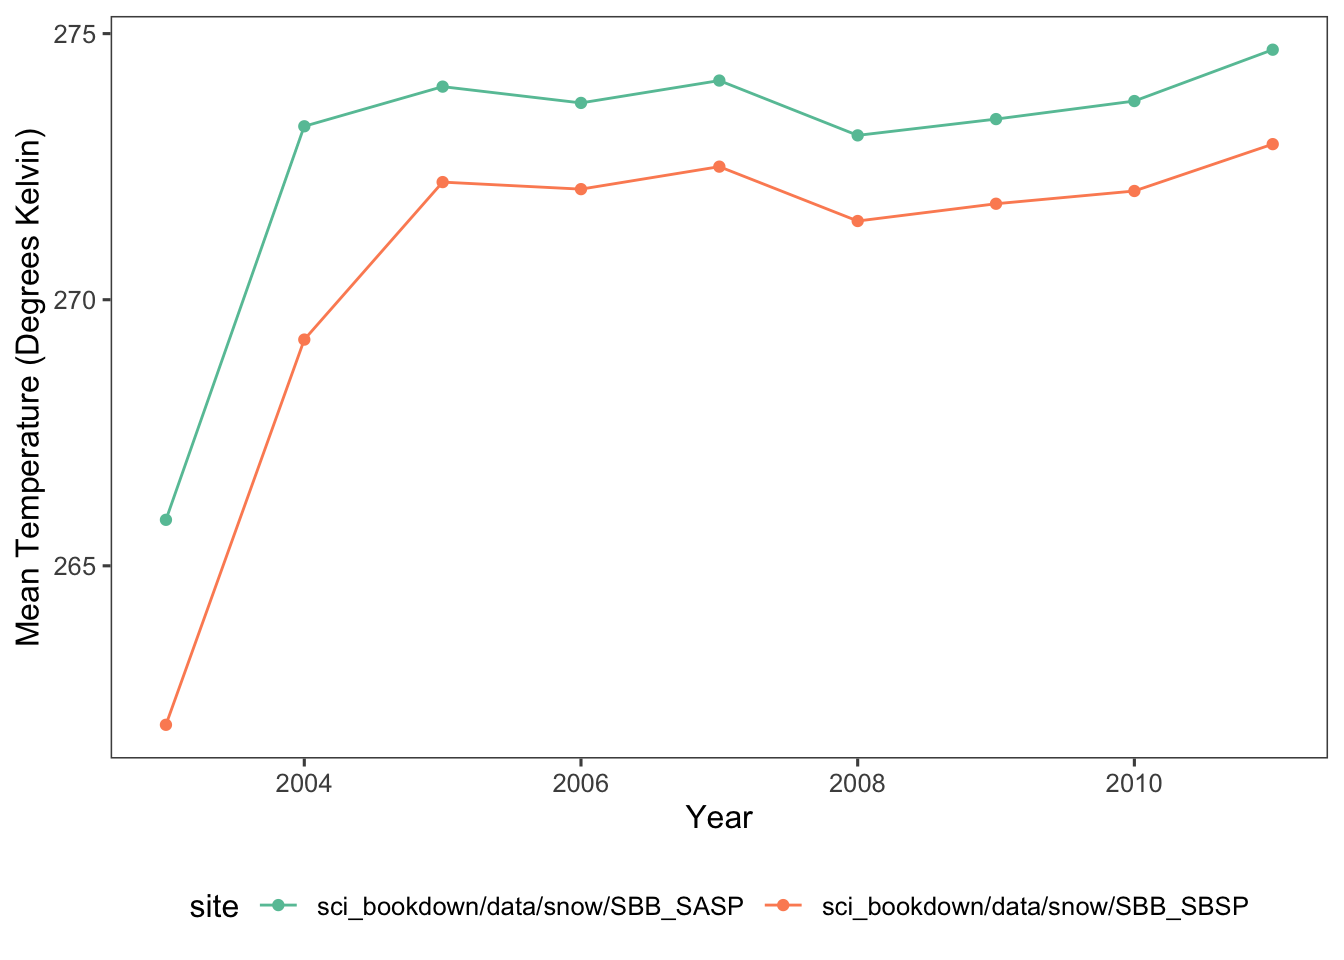 Mean temperature of the SASP (teal) and SBSP (orange) sites from 2003 to 2012, in degrees Kelvin.